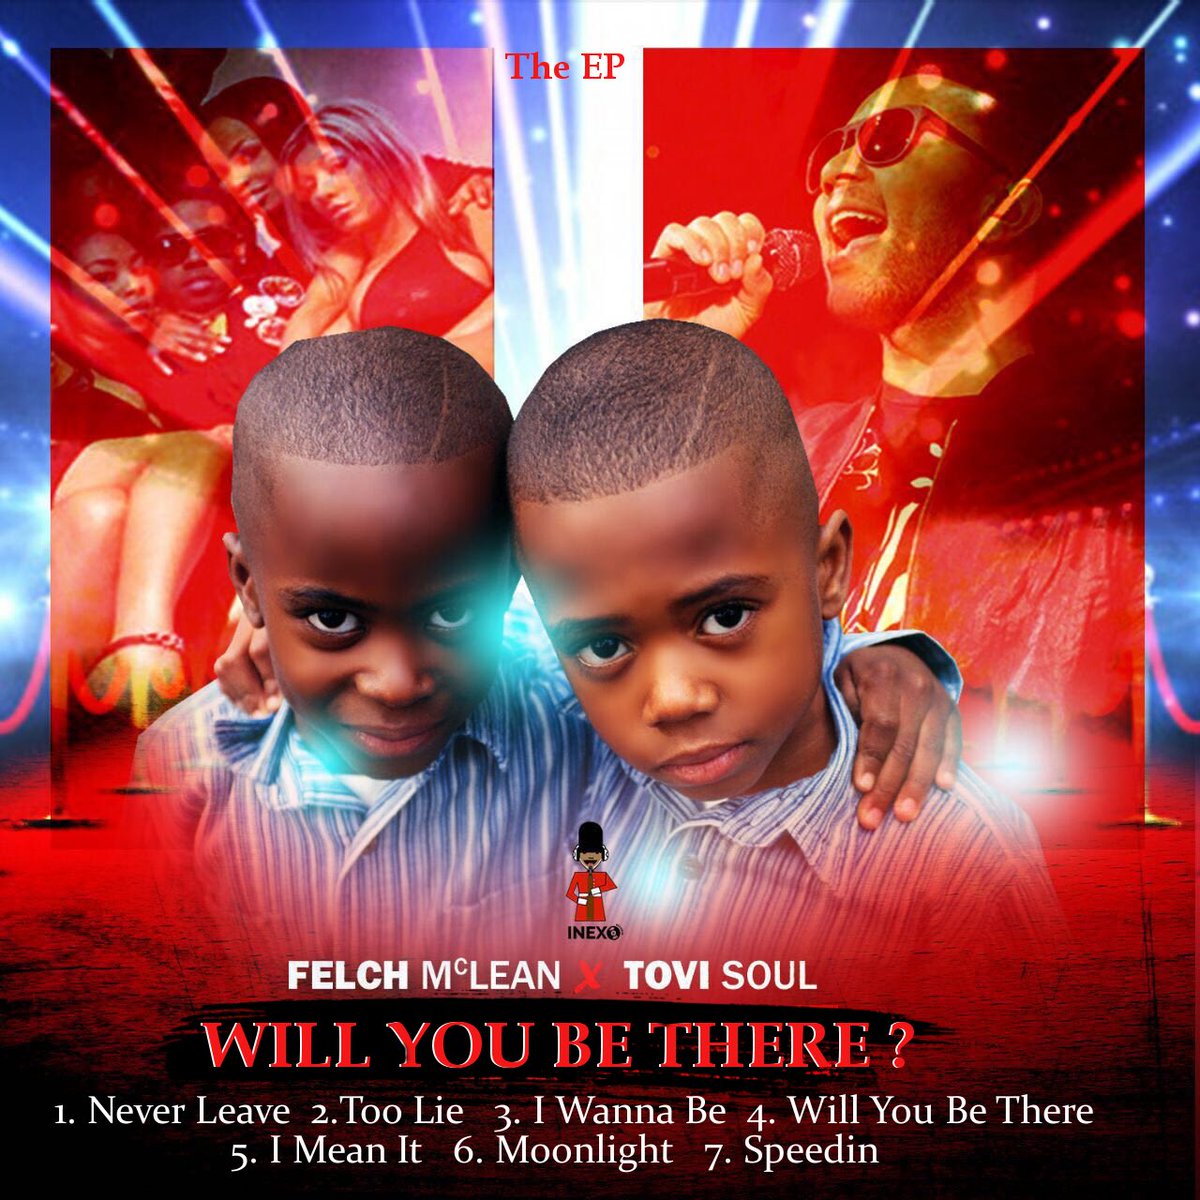 New valentines (EP) 14th Feb 2k18 #WillYouBeThere lovers duet #felchmclean #tovisoul would like to know #RNB #SoulTrain @lifeinfemale @BaeQuoteslover @TextBooksMsgs @love_one8409 @loveyoumothers @Innocpics06 @Bestlovephrase @theoceanvideos @itswordstype @itsrealloves @lostinlve